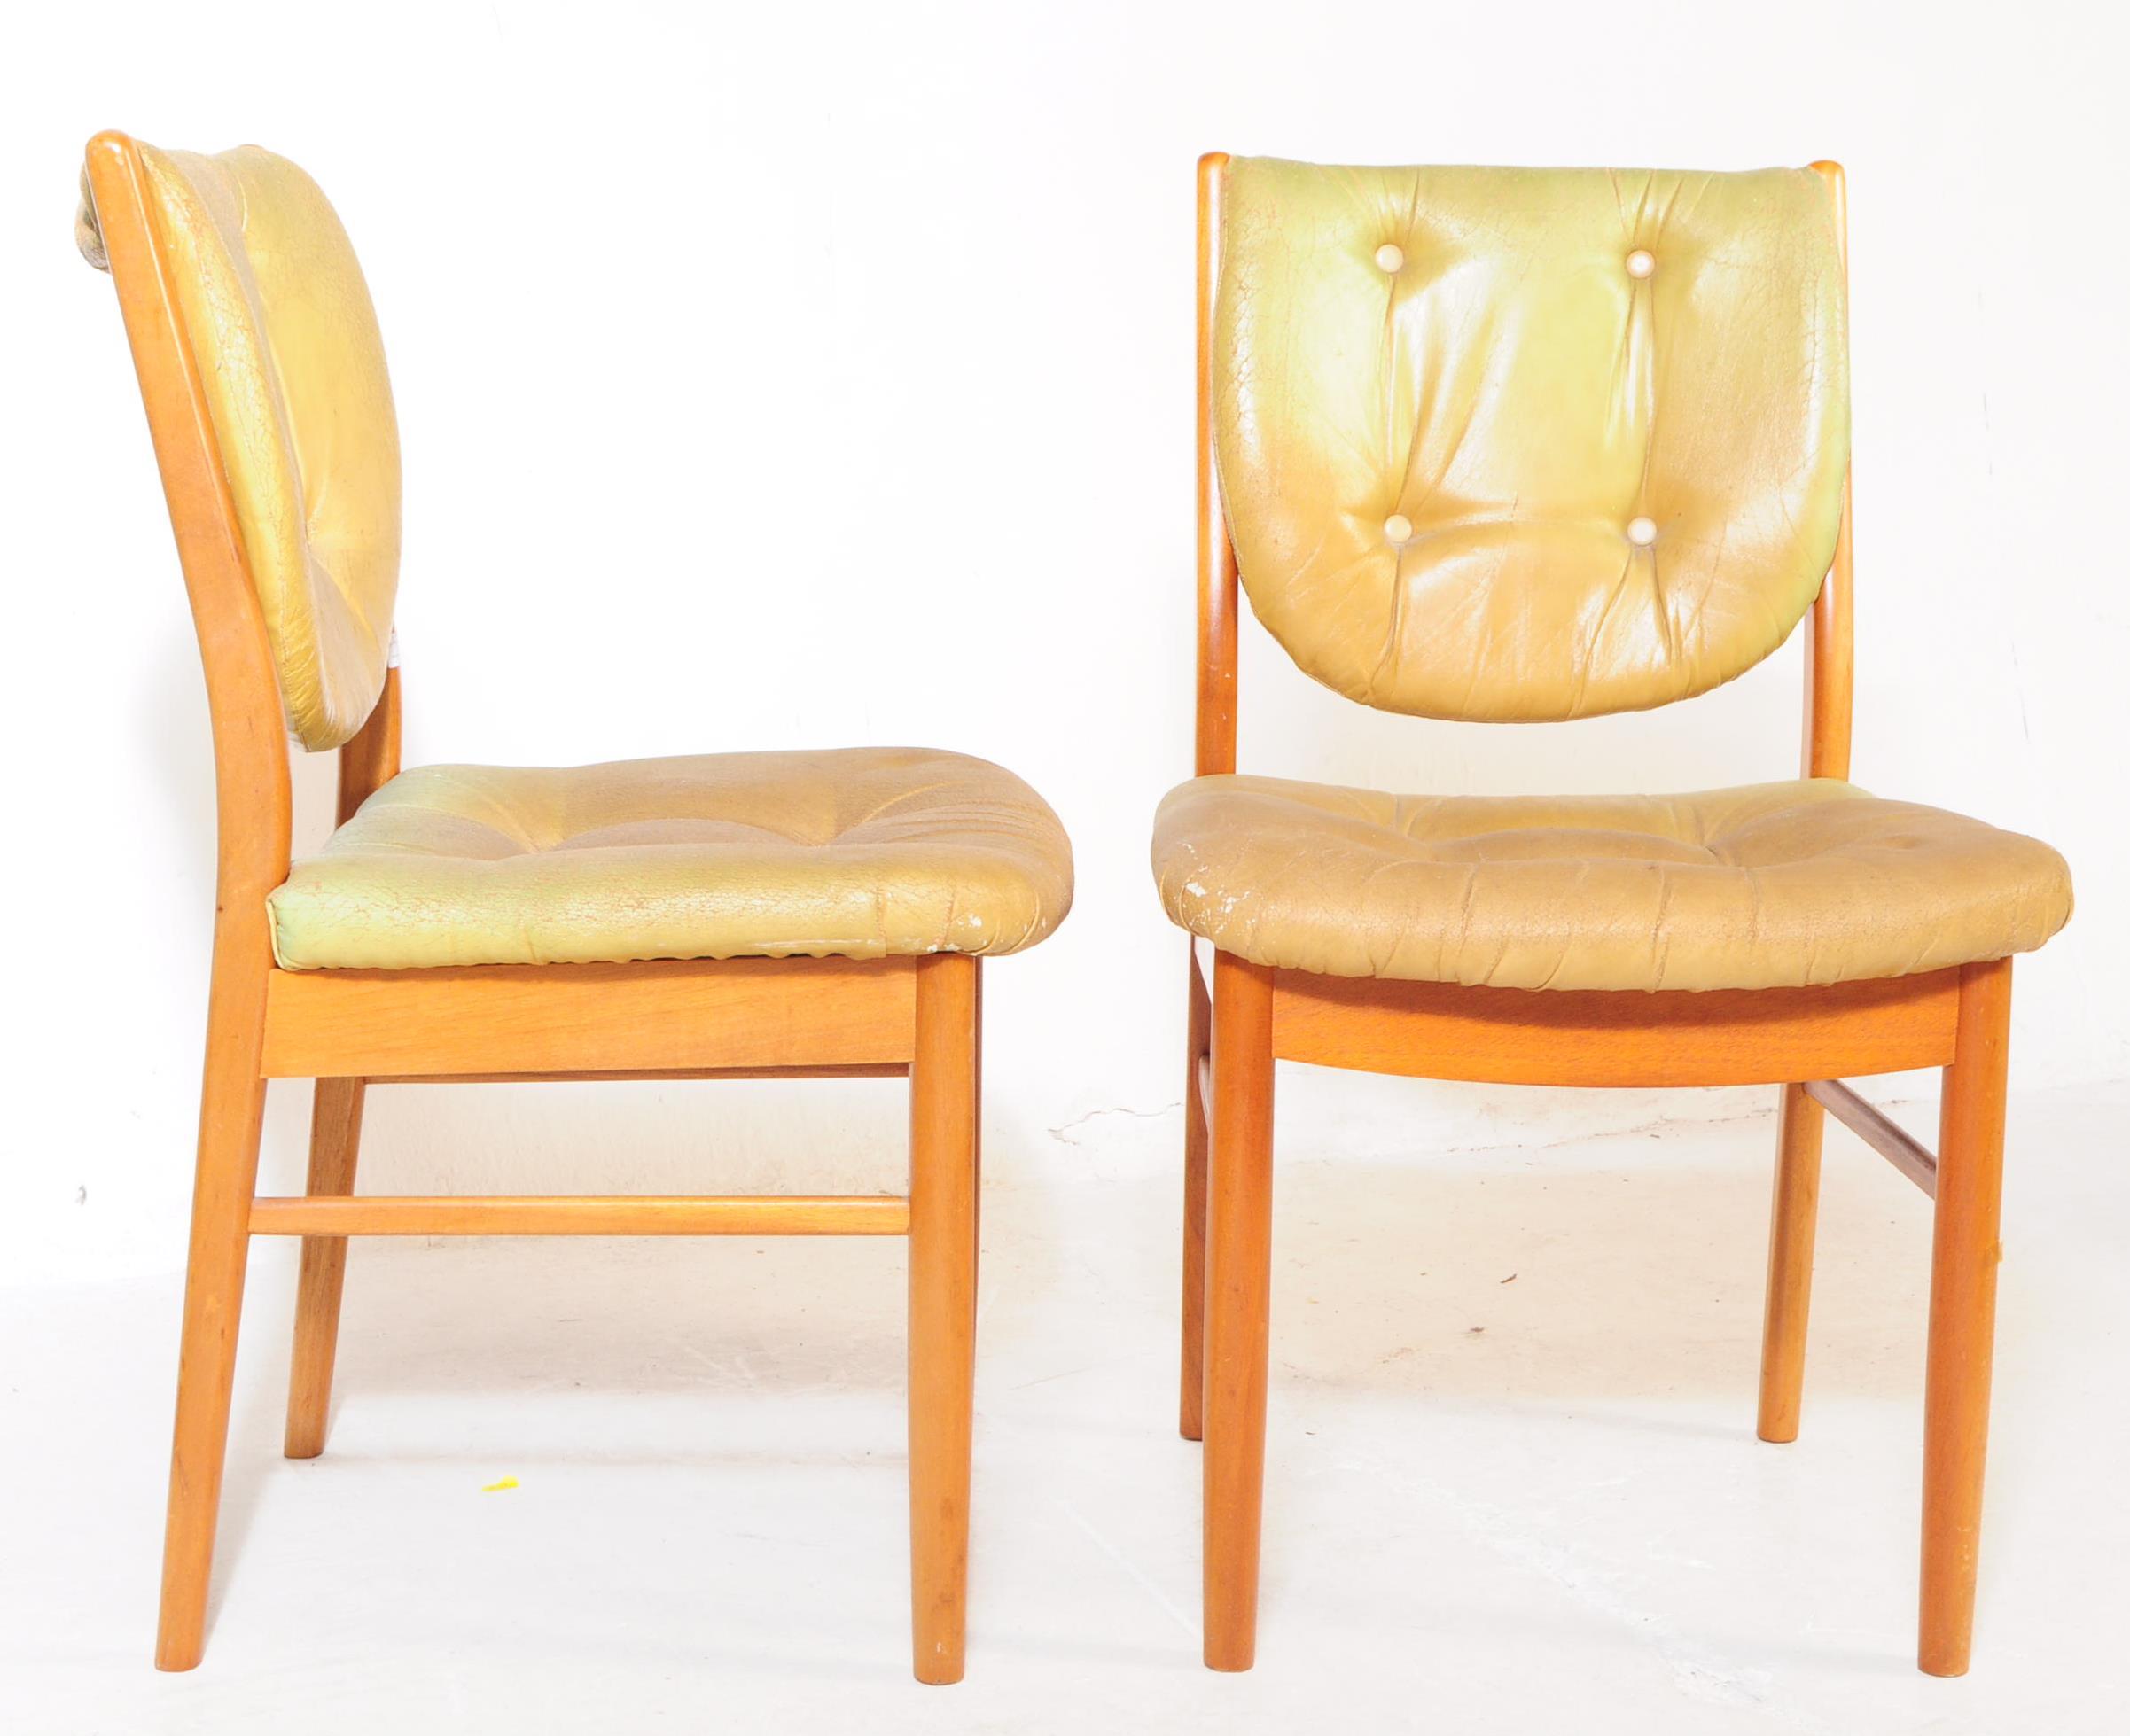 BRITISH MODERN DESIGN - SET OF FOUR VINTAGE DINING CHAIRS - Image 2 of 4